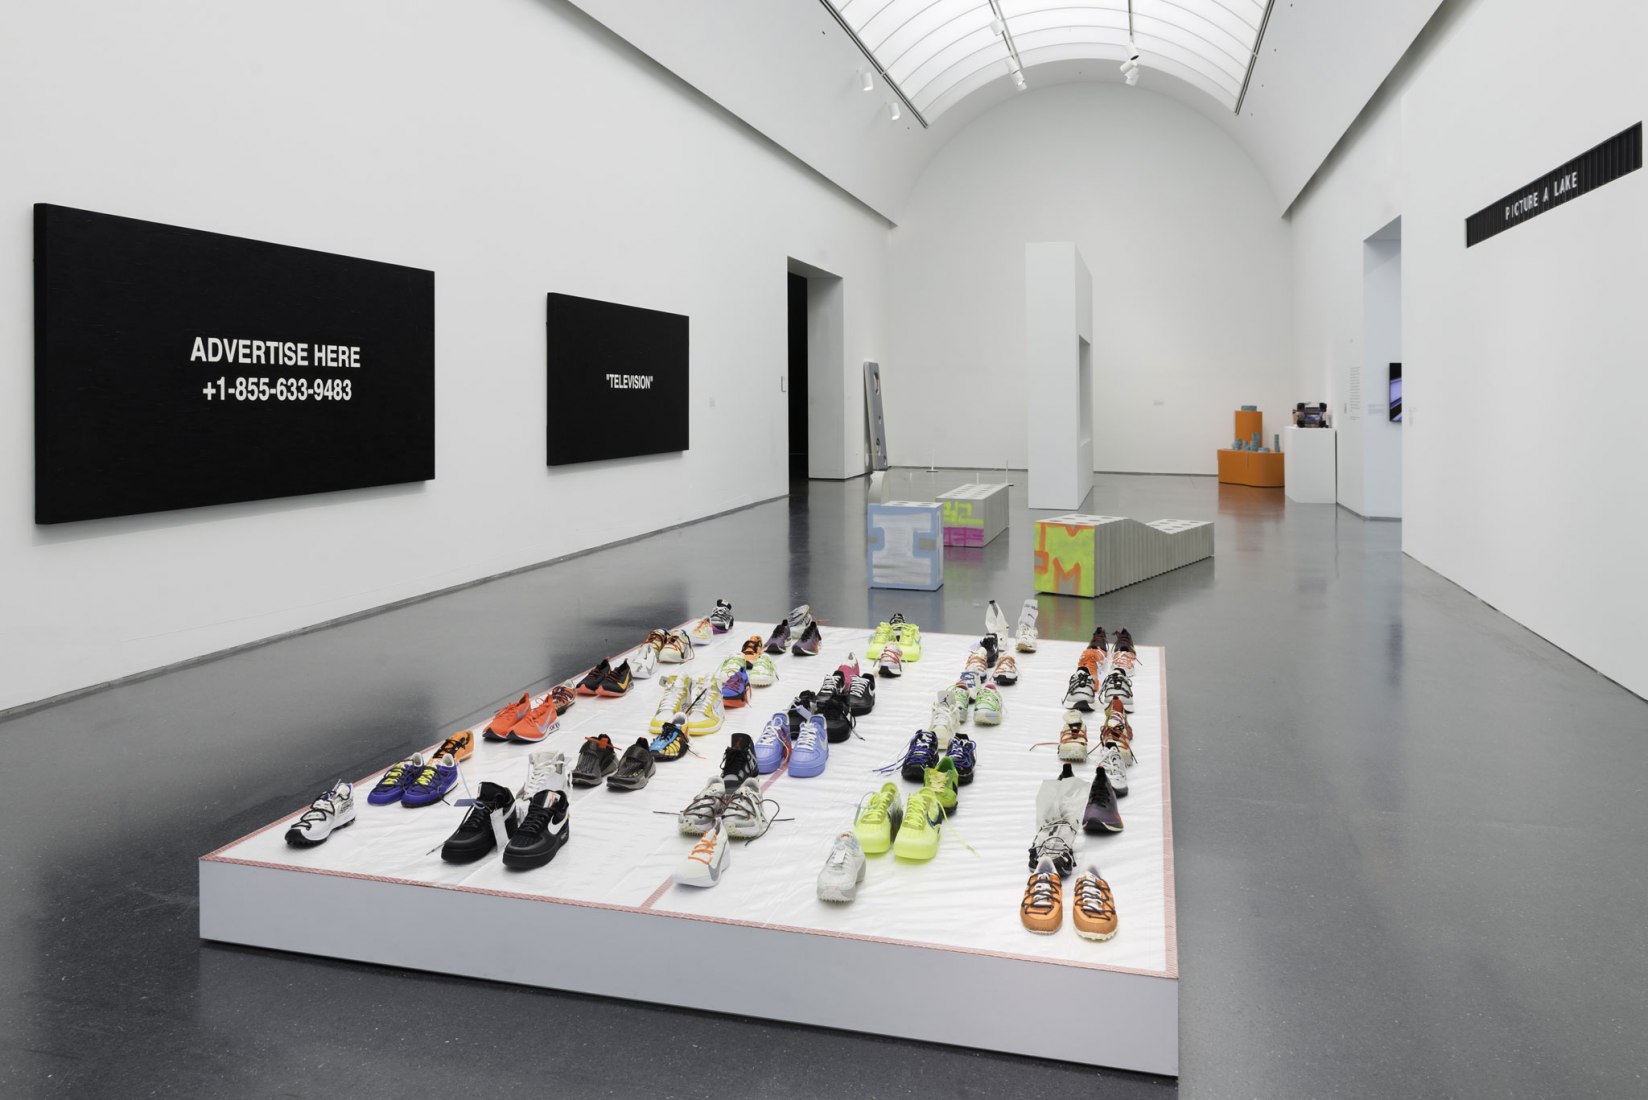 Virgil Abloh at the Museum: “Figures of Speech”